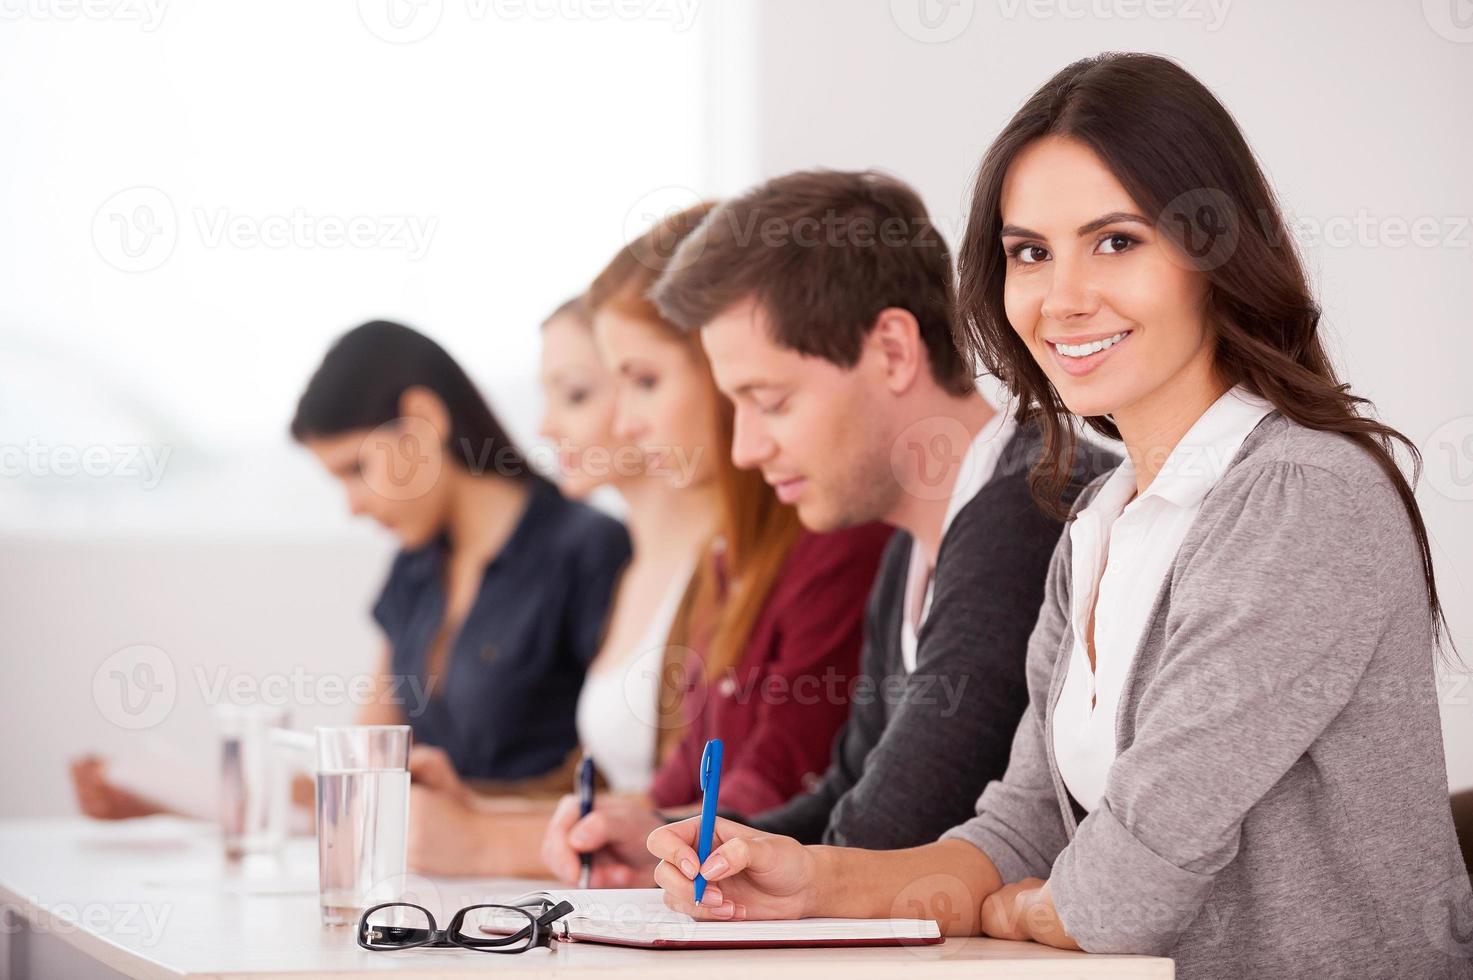 People at the seminar. Attractive young woman smiling at camera while sitting together with another people at the table photo